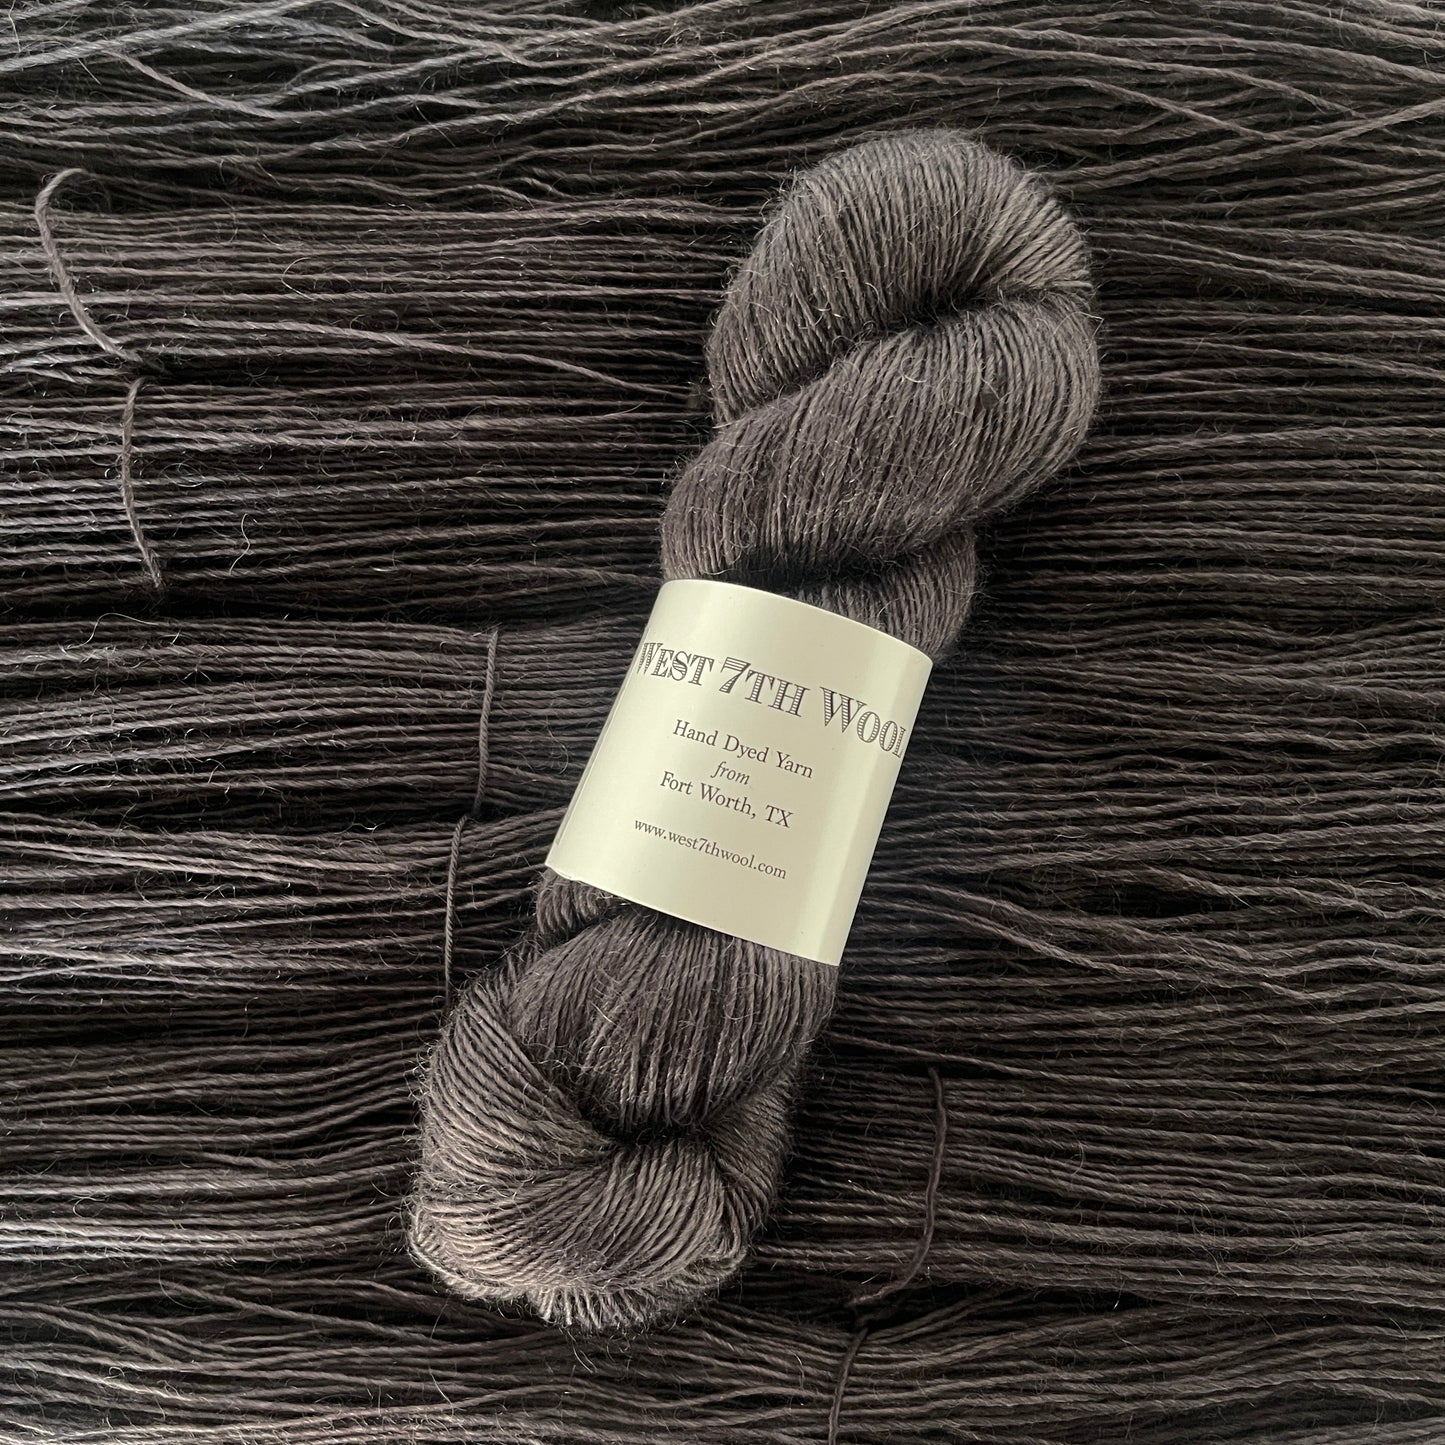 West 7th Wool - 7th St Singles + Mohair